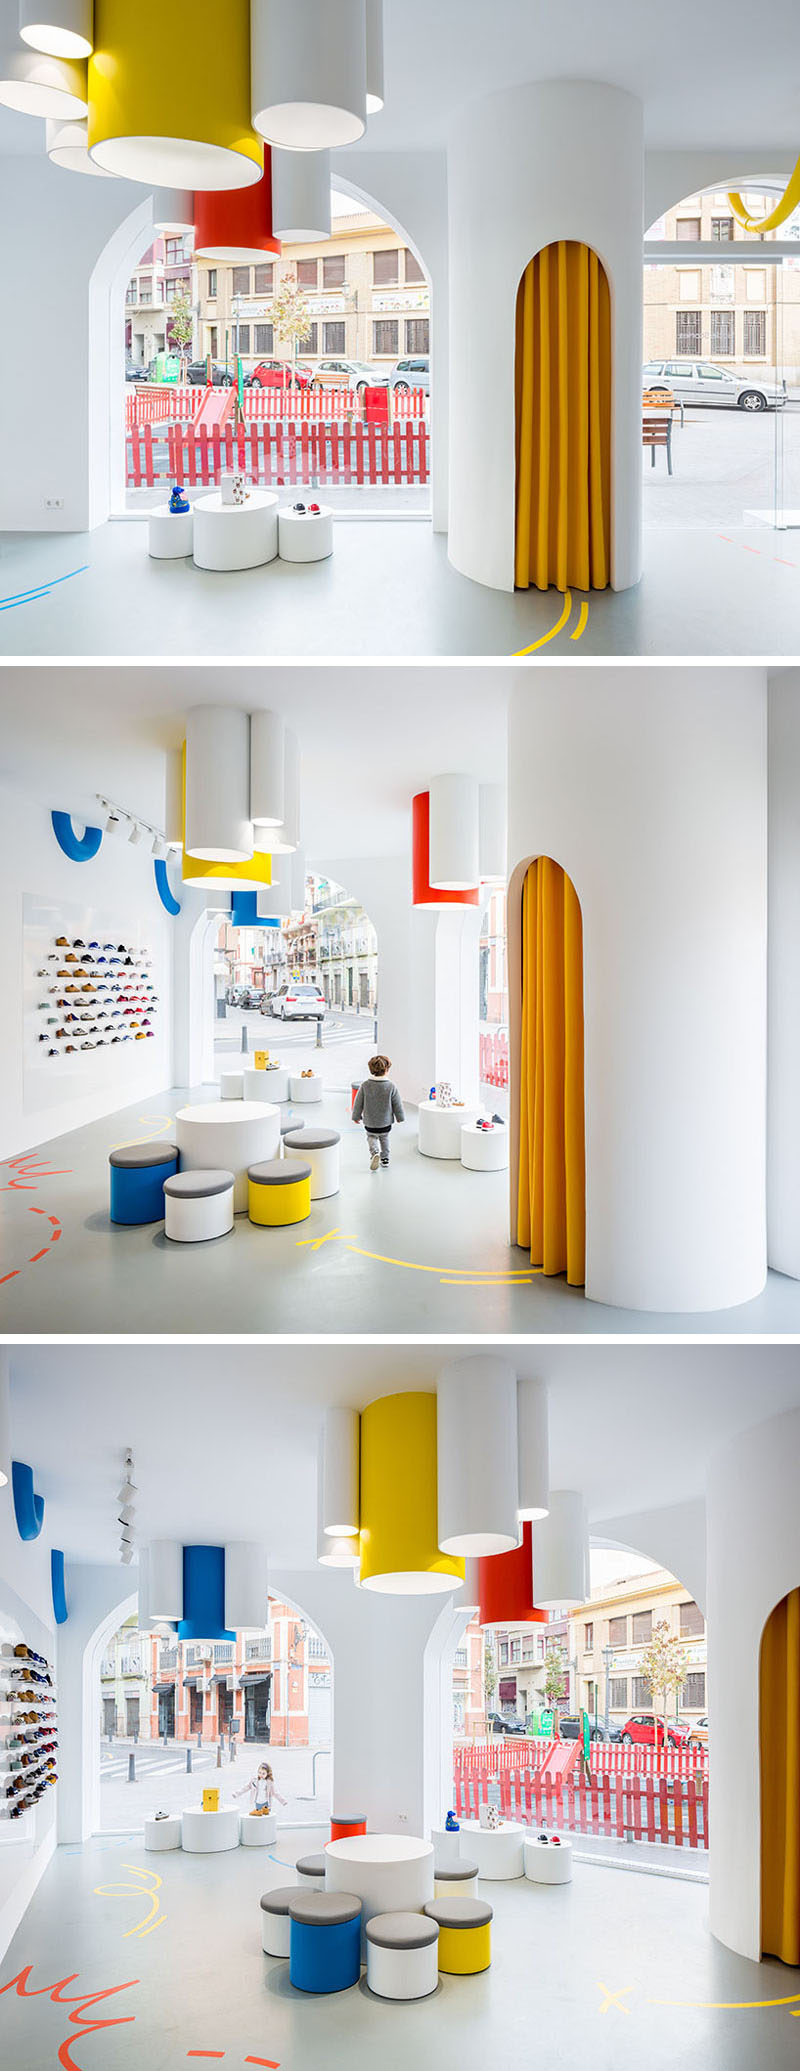 Once inside this modern retail store, the bright white interior is filled with natural light from the large windows, and additional tube lights hang from the ceiling. Pops of color are used to add a fun touch to the interior. #ModernRetailStore #KidsStore #InteriorDesign